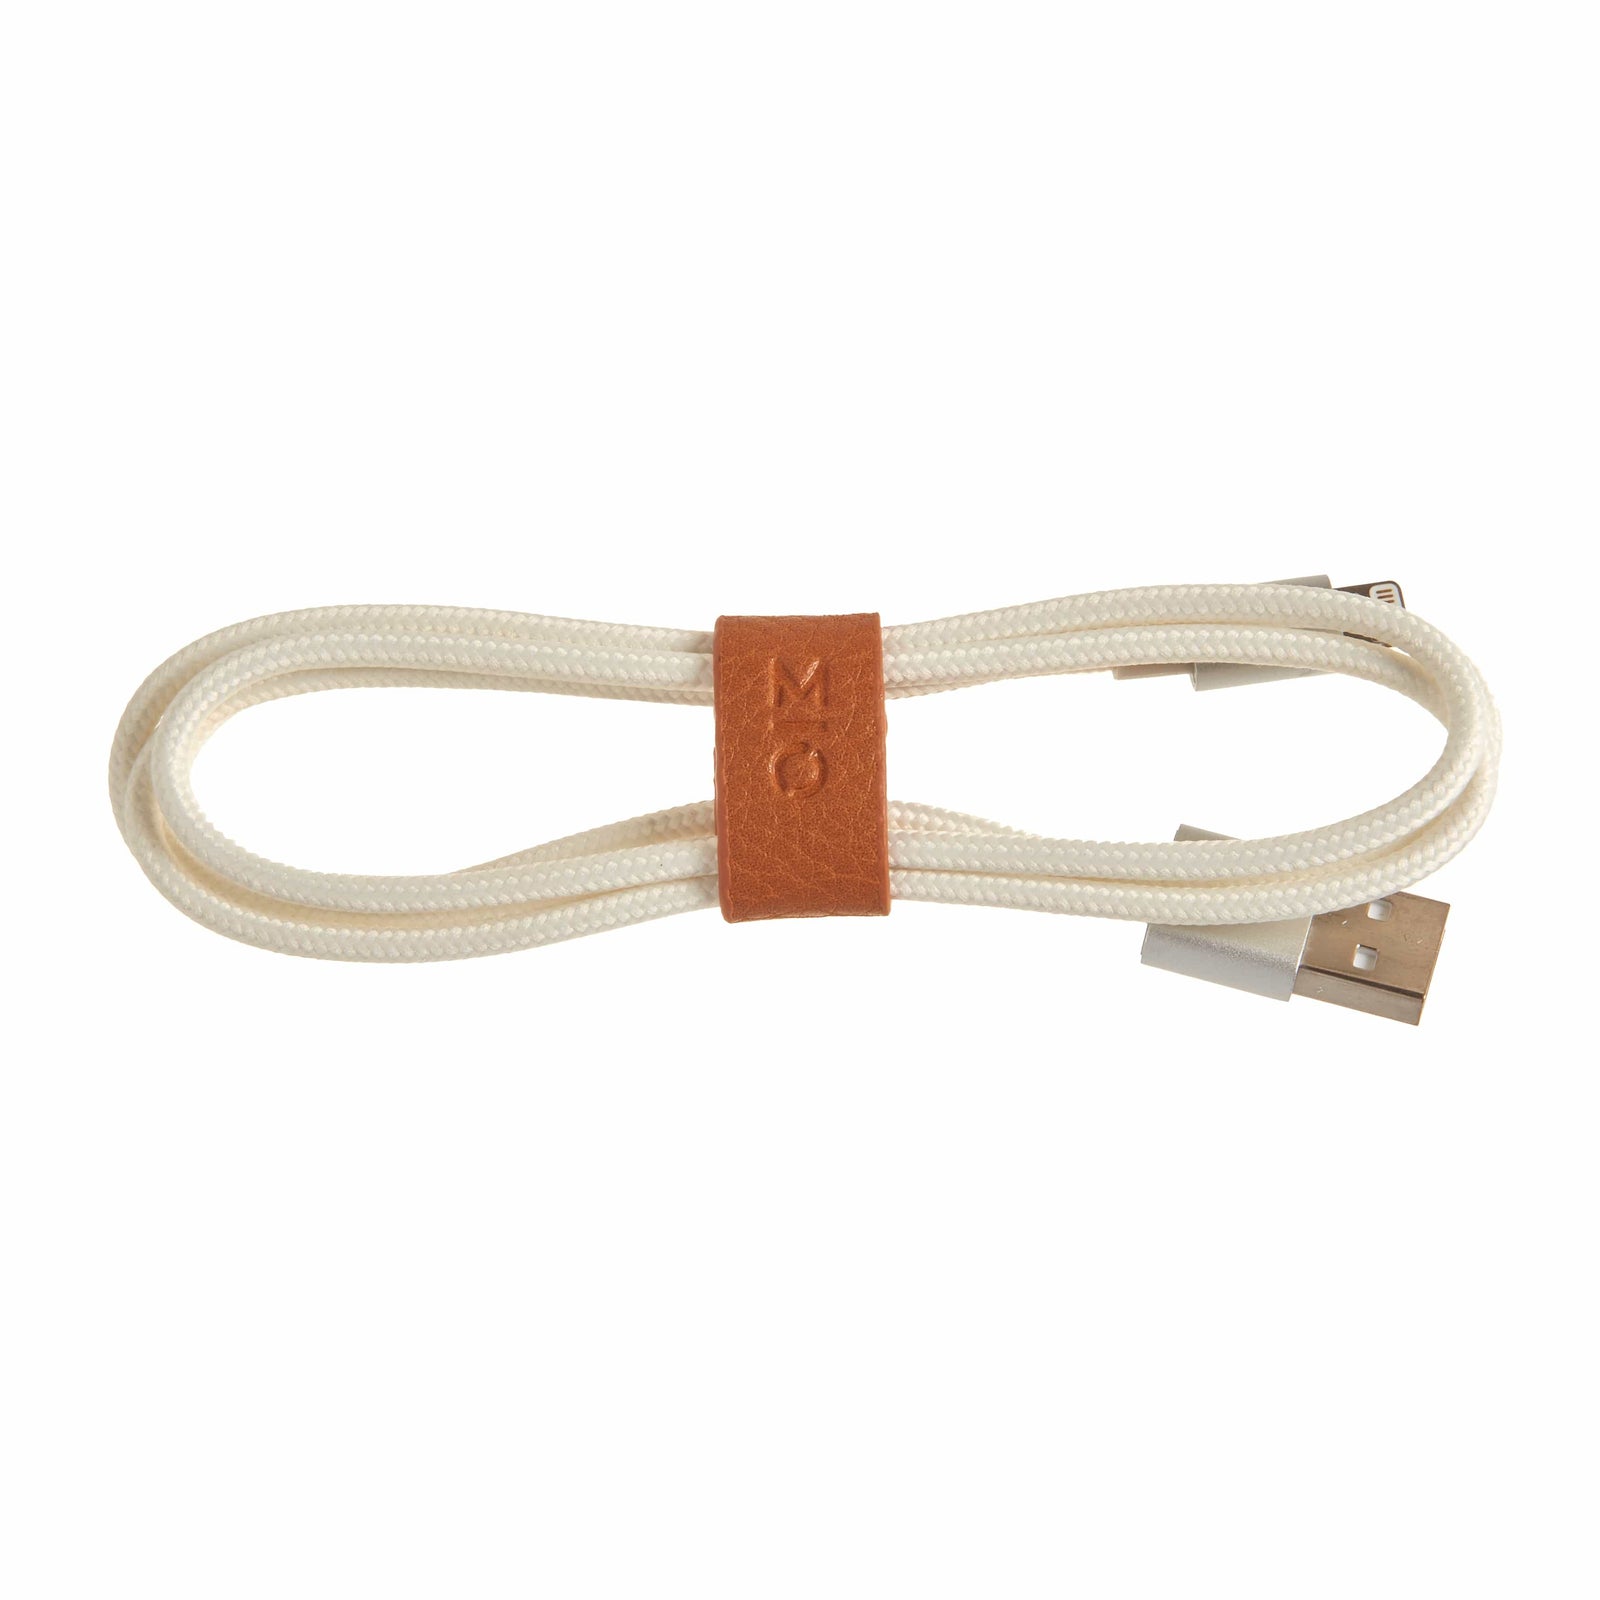 Motile Tassel Cord with Lightning Connection, Camel, Size: Cord Length: 12.75 inch